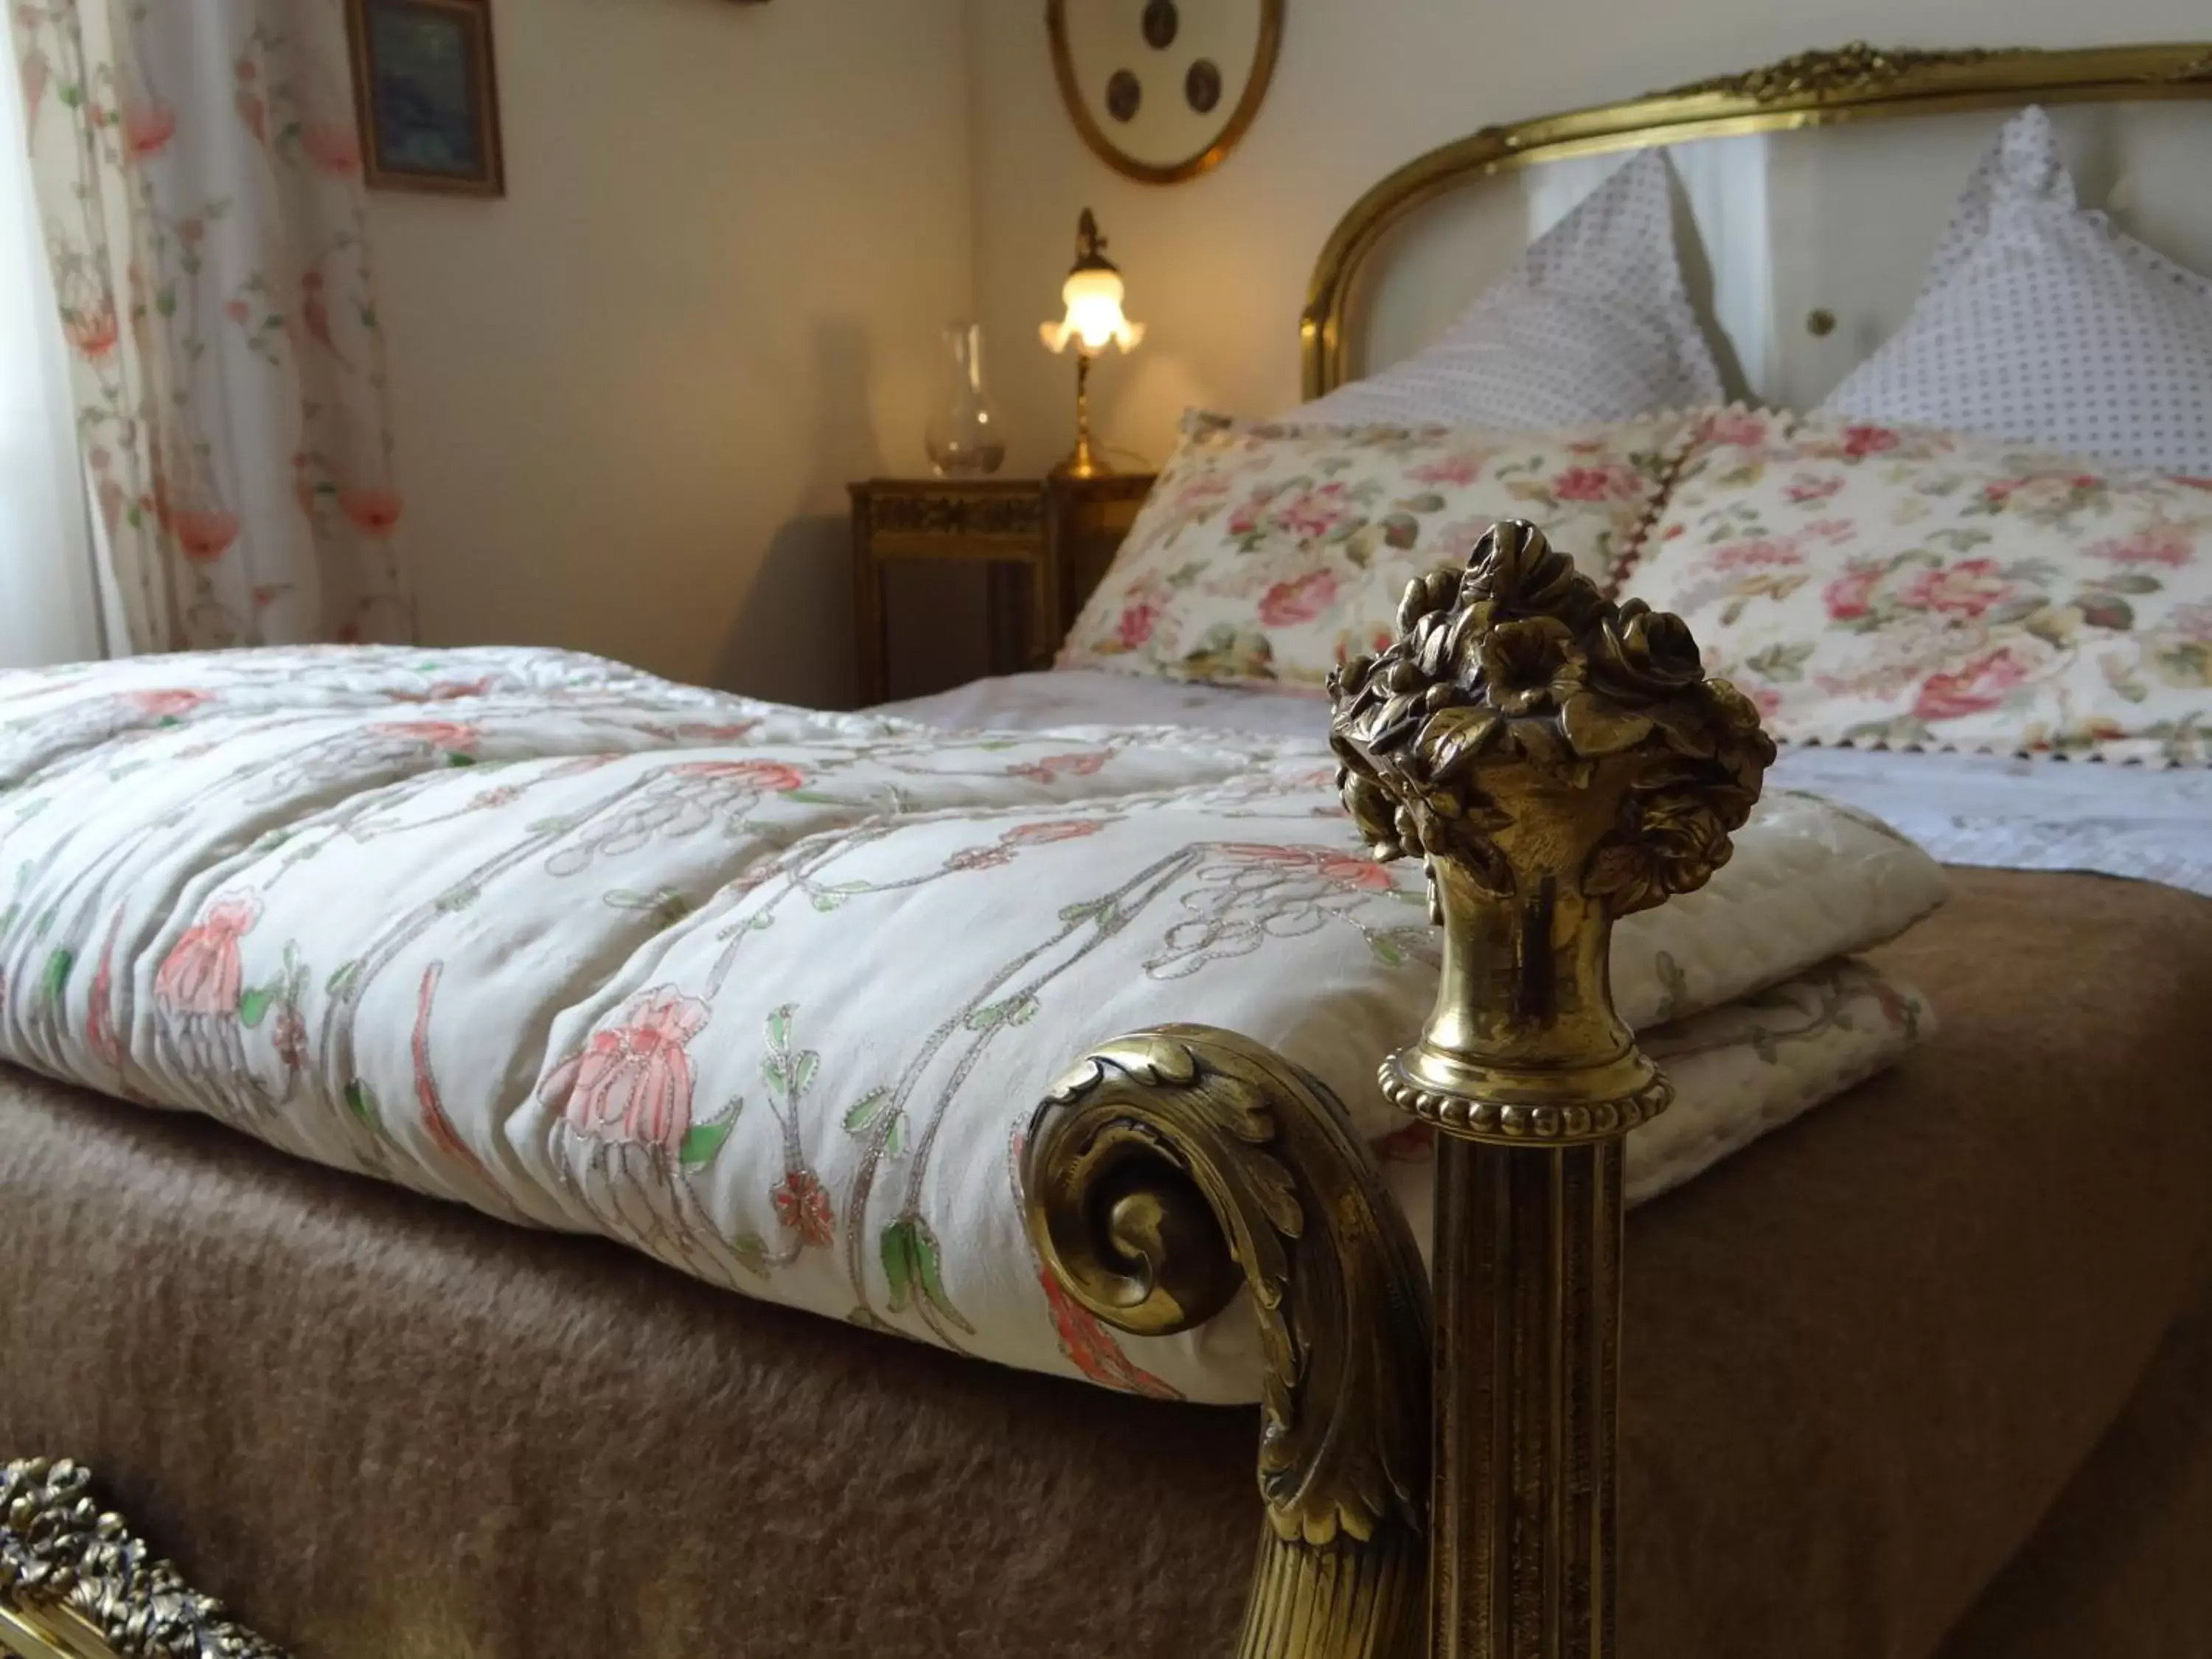 Bed, Room Photo in Château Mesny